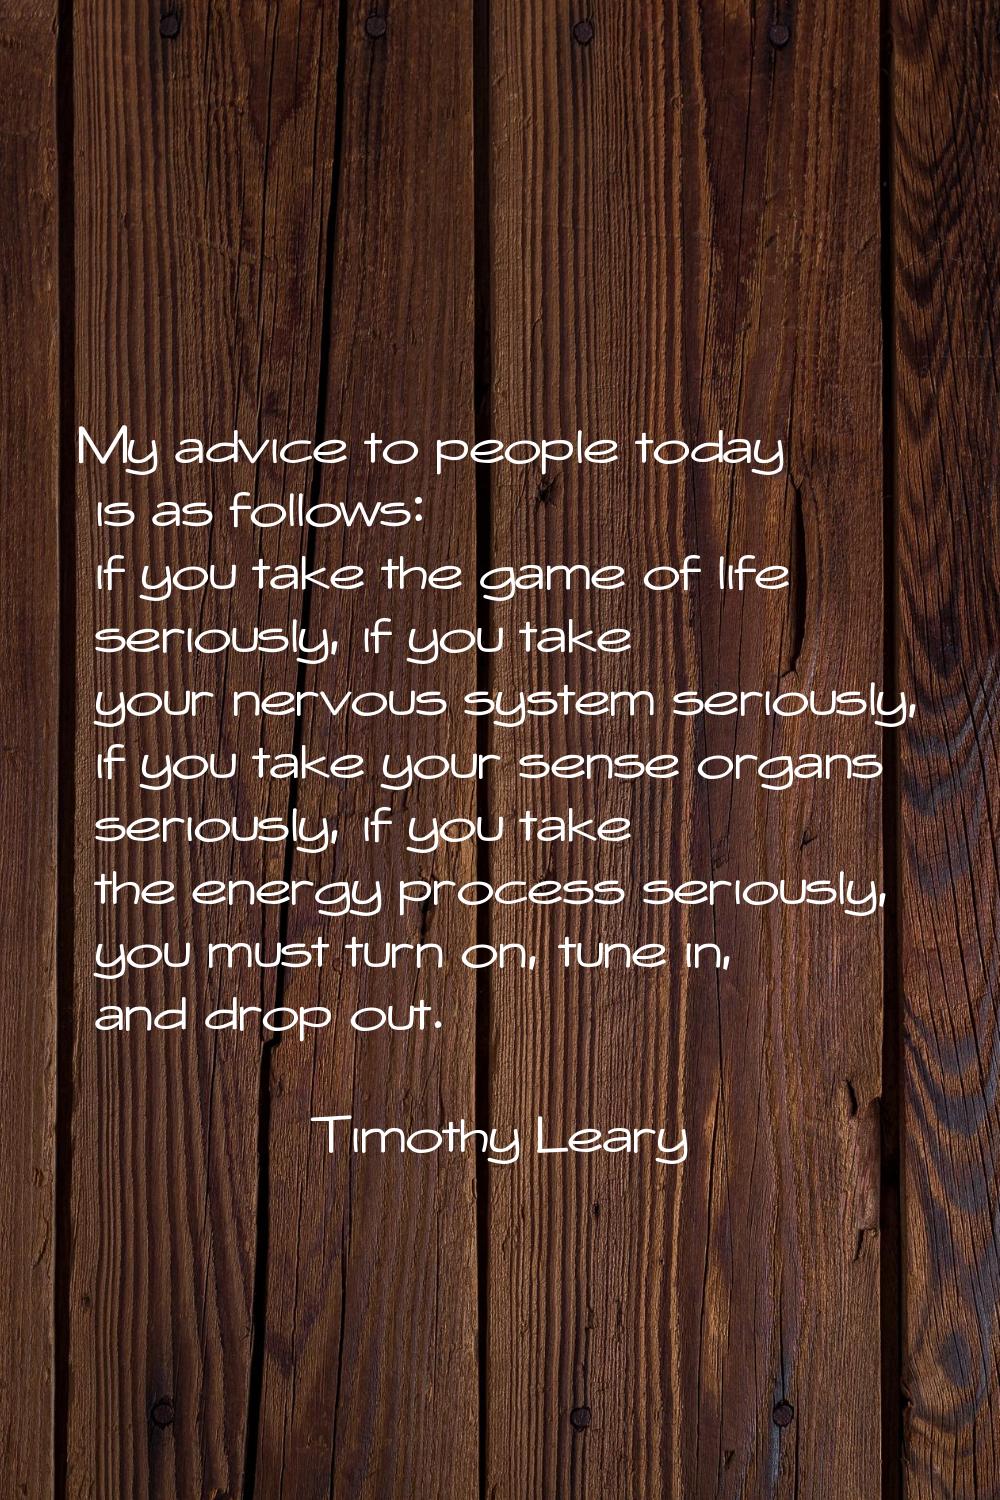 My advice to people today is as follows: if you take the game of life seriously, if you take your n